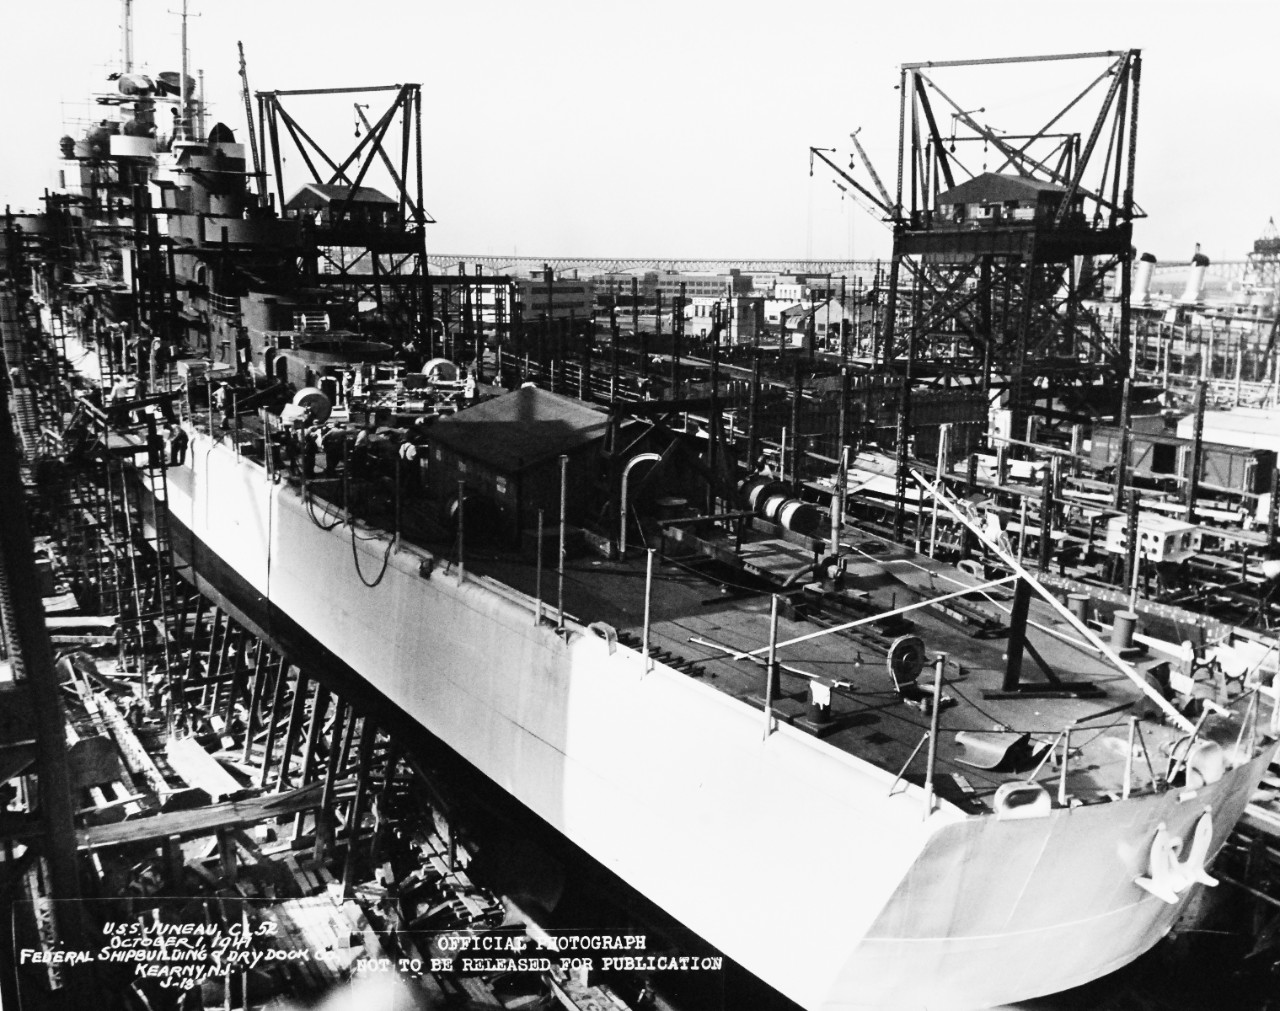 19-LC-28142:  USS Juneau (CL-52),  October 1941.      Light cruiser shown under construction at Federal Shipbuilding and Drydock Company, Kearny, New Jersey, October 1, 1941.  U.S. Bureau of Ships Photograph, now in the collections of the National Archives.  (2015/02/18). 